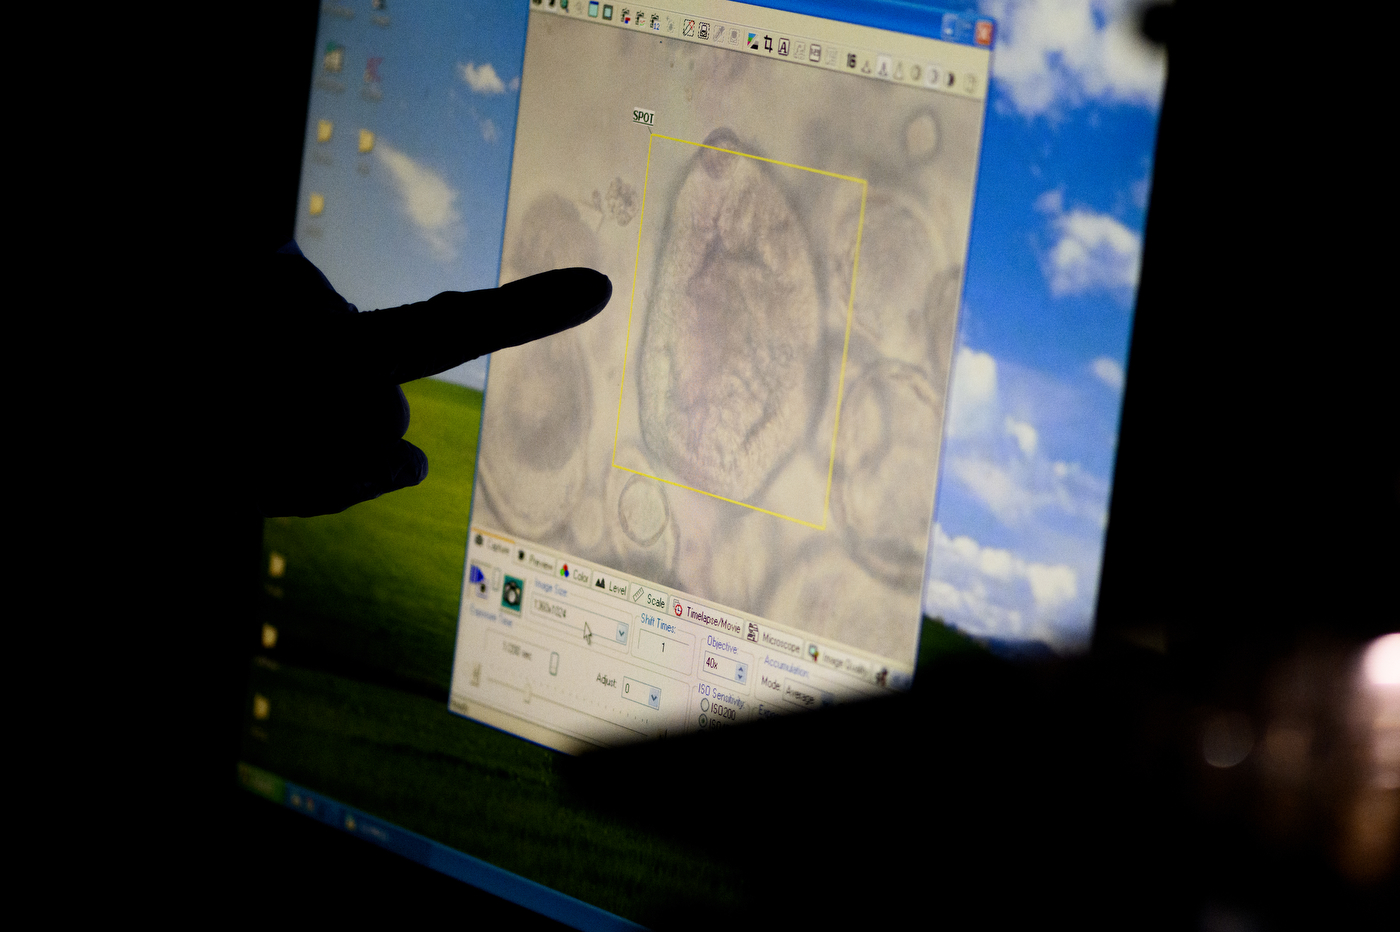 finger pointing to miscroscopic image enlarged on computer screen